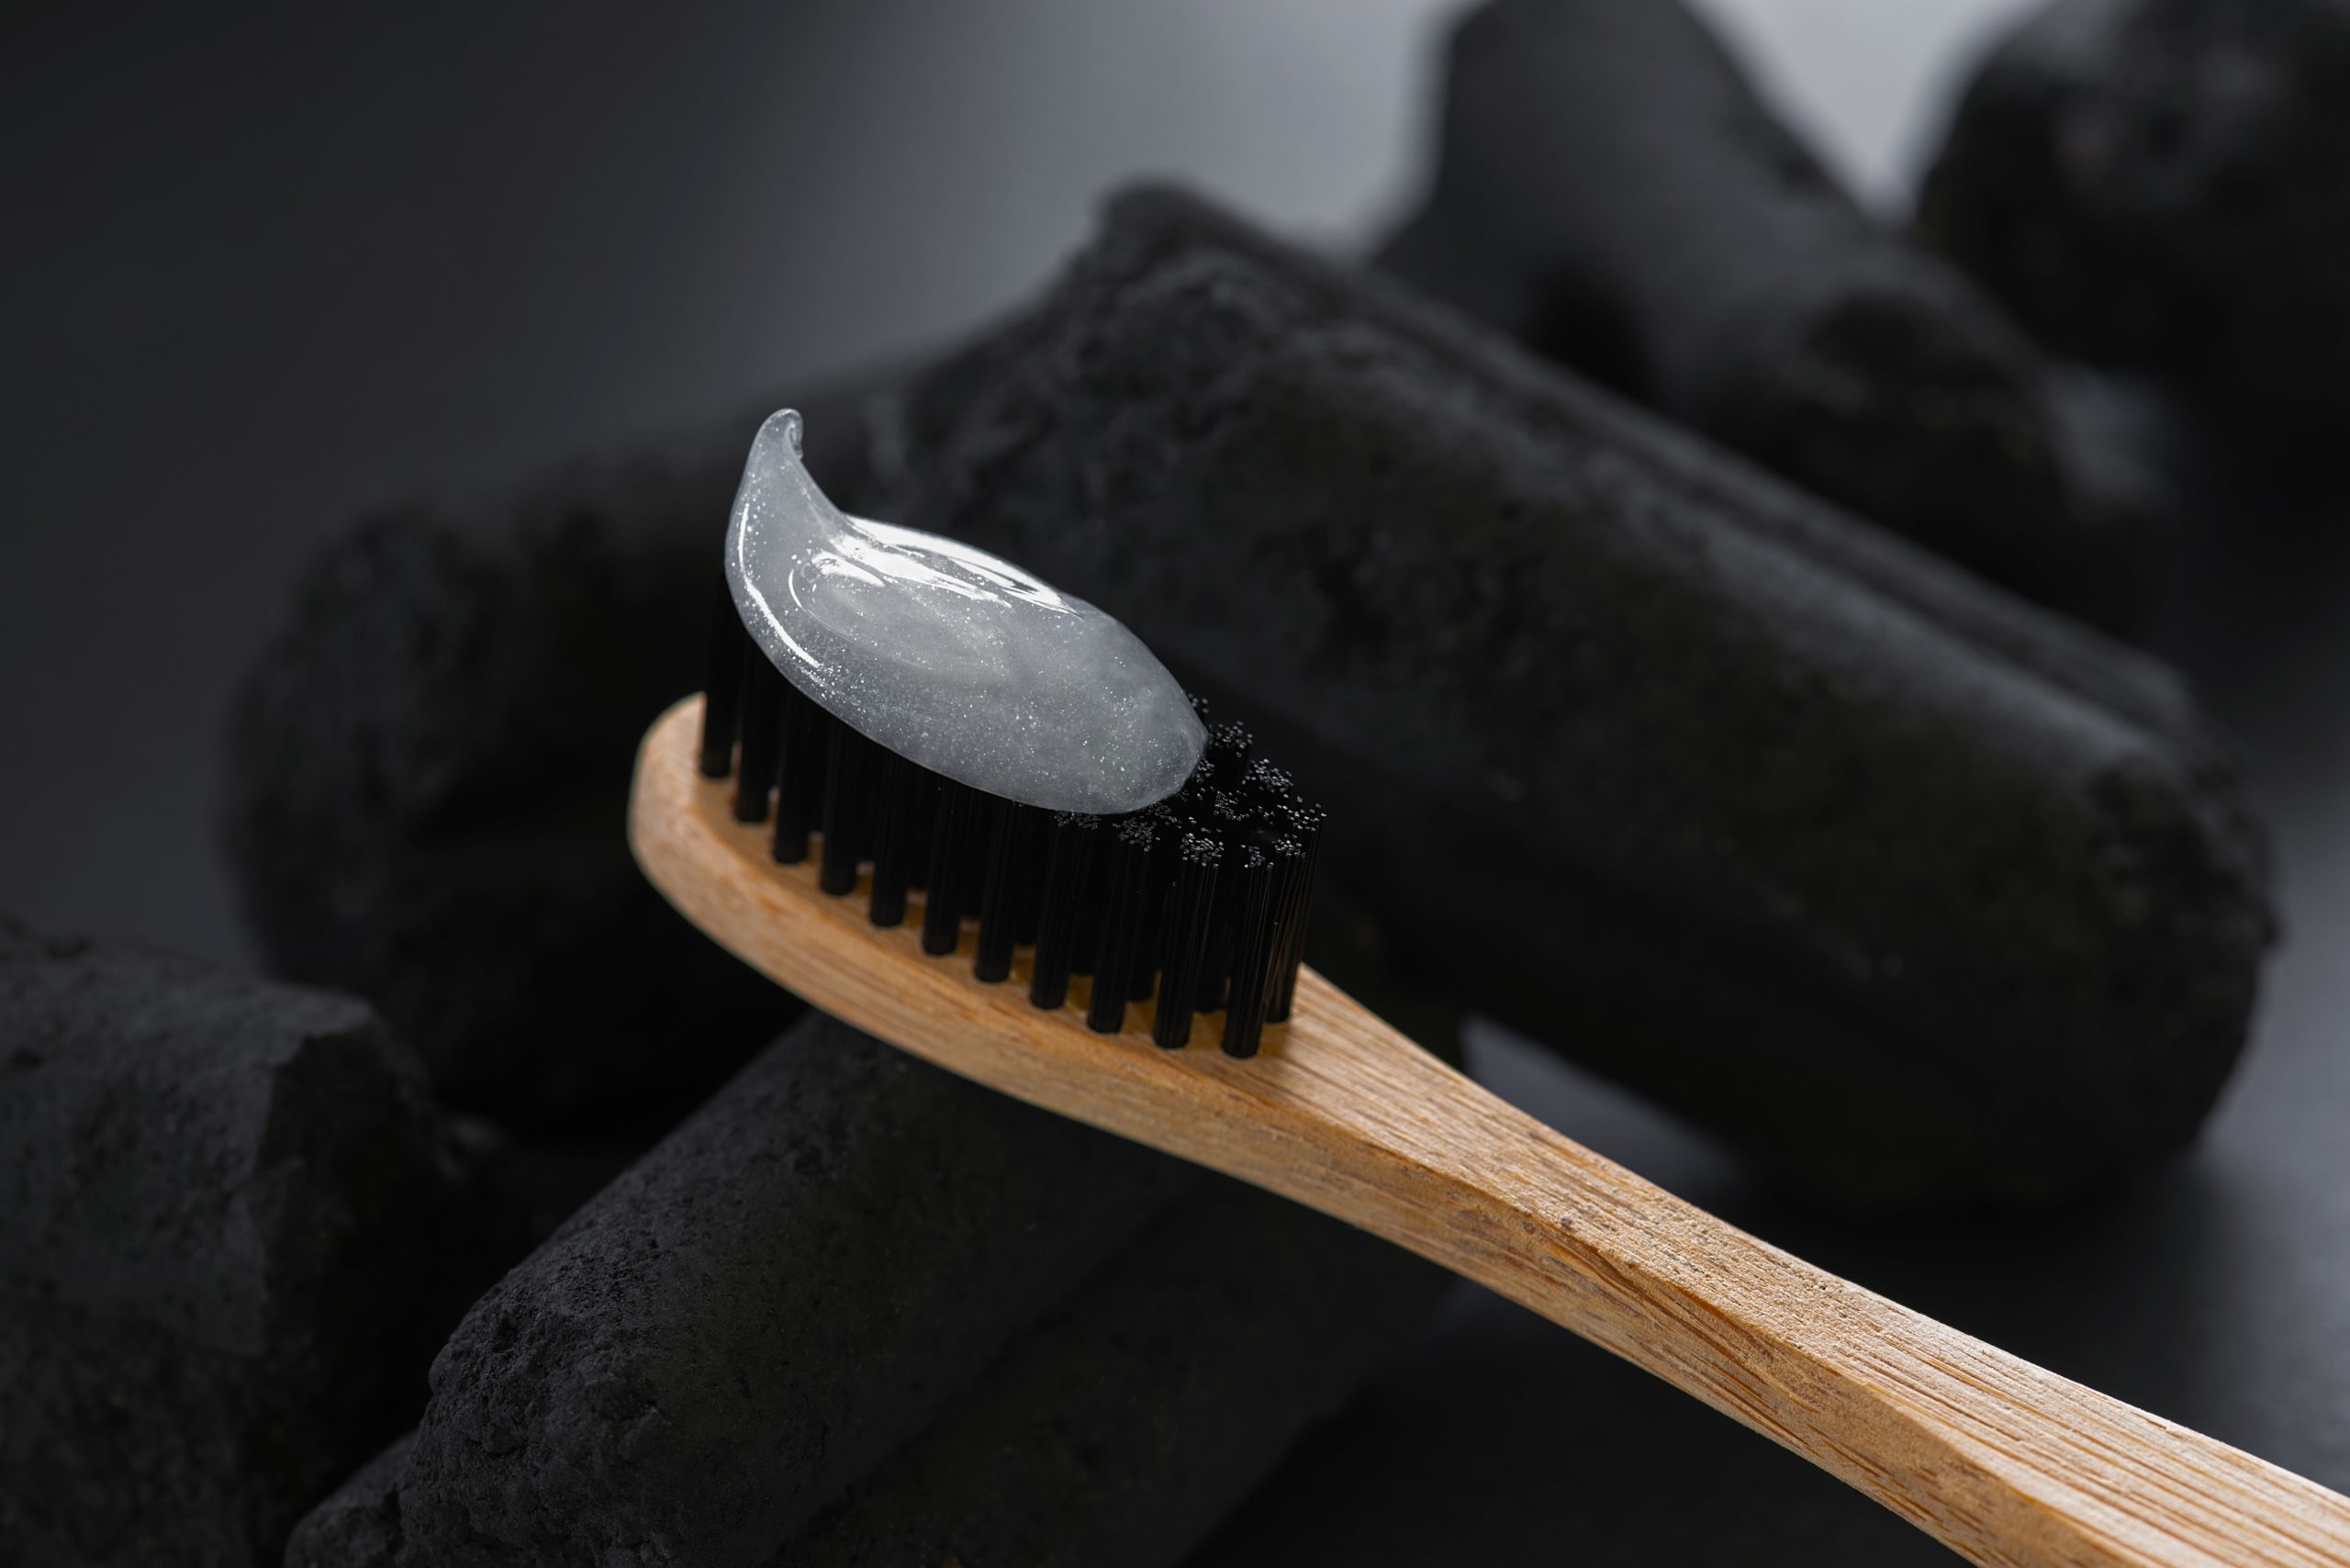 Charcoal Toothpaste: Benefits? Safe? Effects? | The Super Dentist Does charcoal toothpaste work? Find out all the benefits, risks, side effects and more. Learn everything about charcoal toothpaste and you health now.